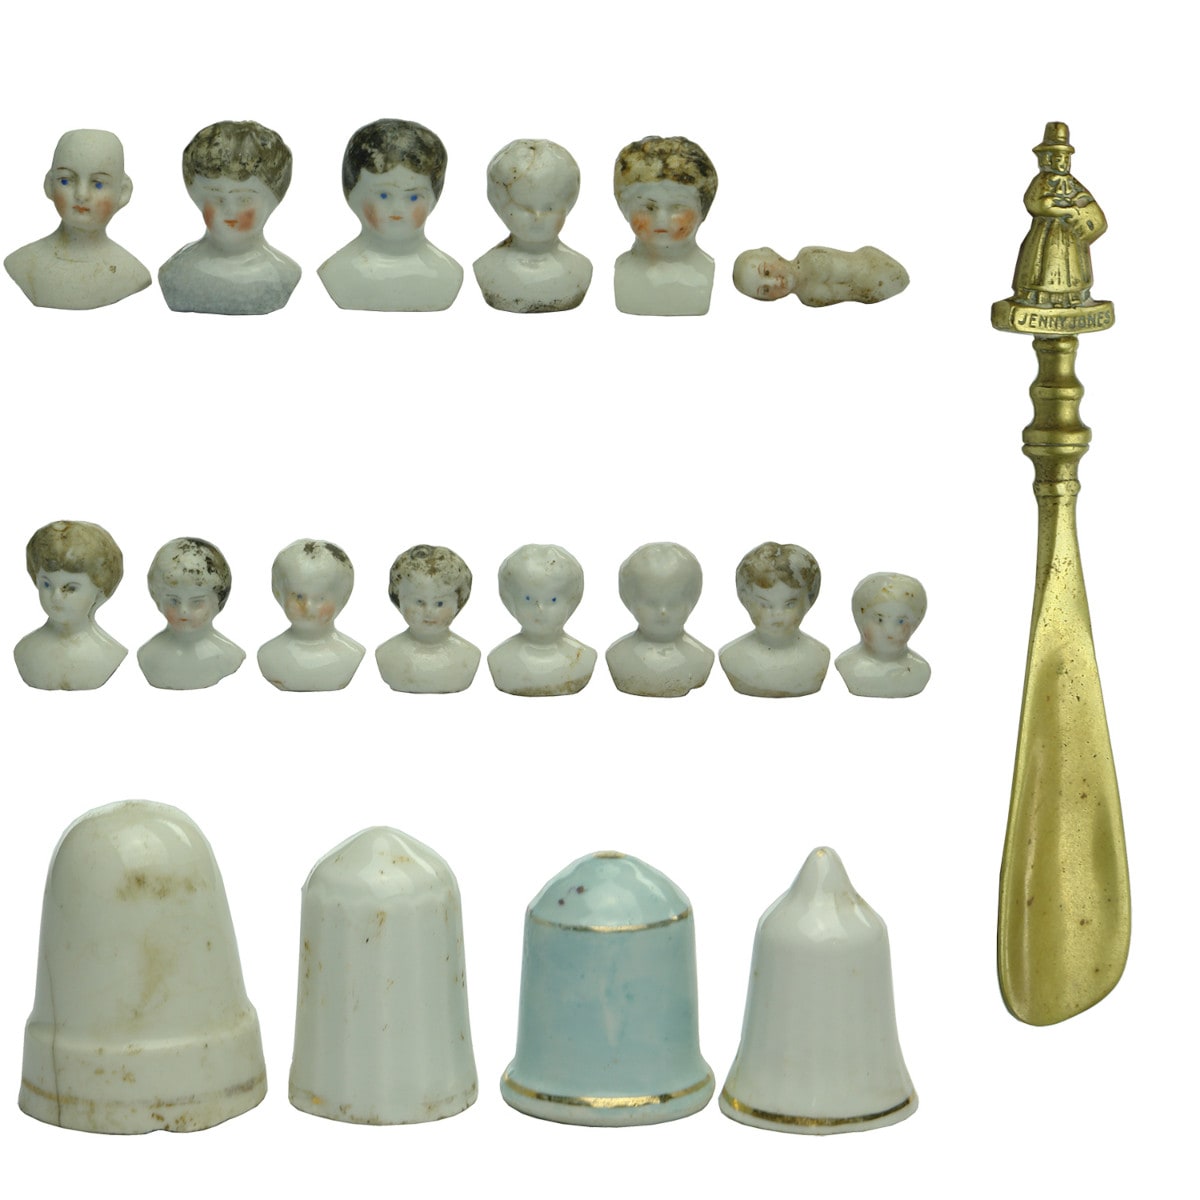 19 items: 14 Dolls heads, 4 candle snuffers and a brass shoe horn with Jenny Jones figure at top.